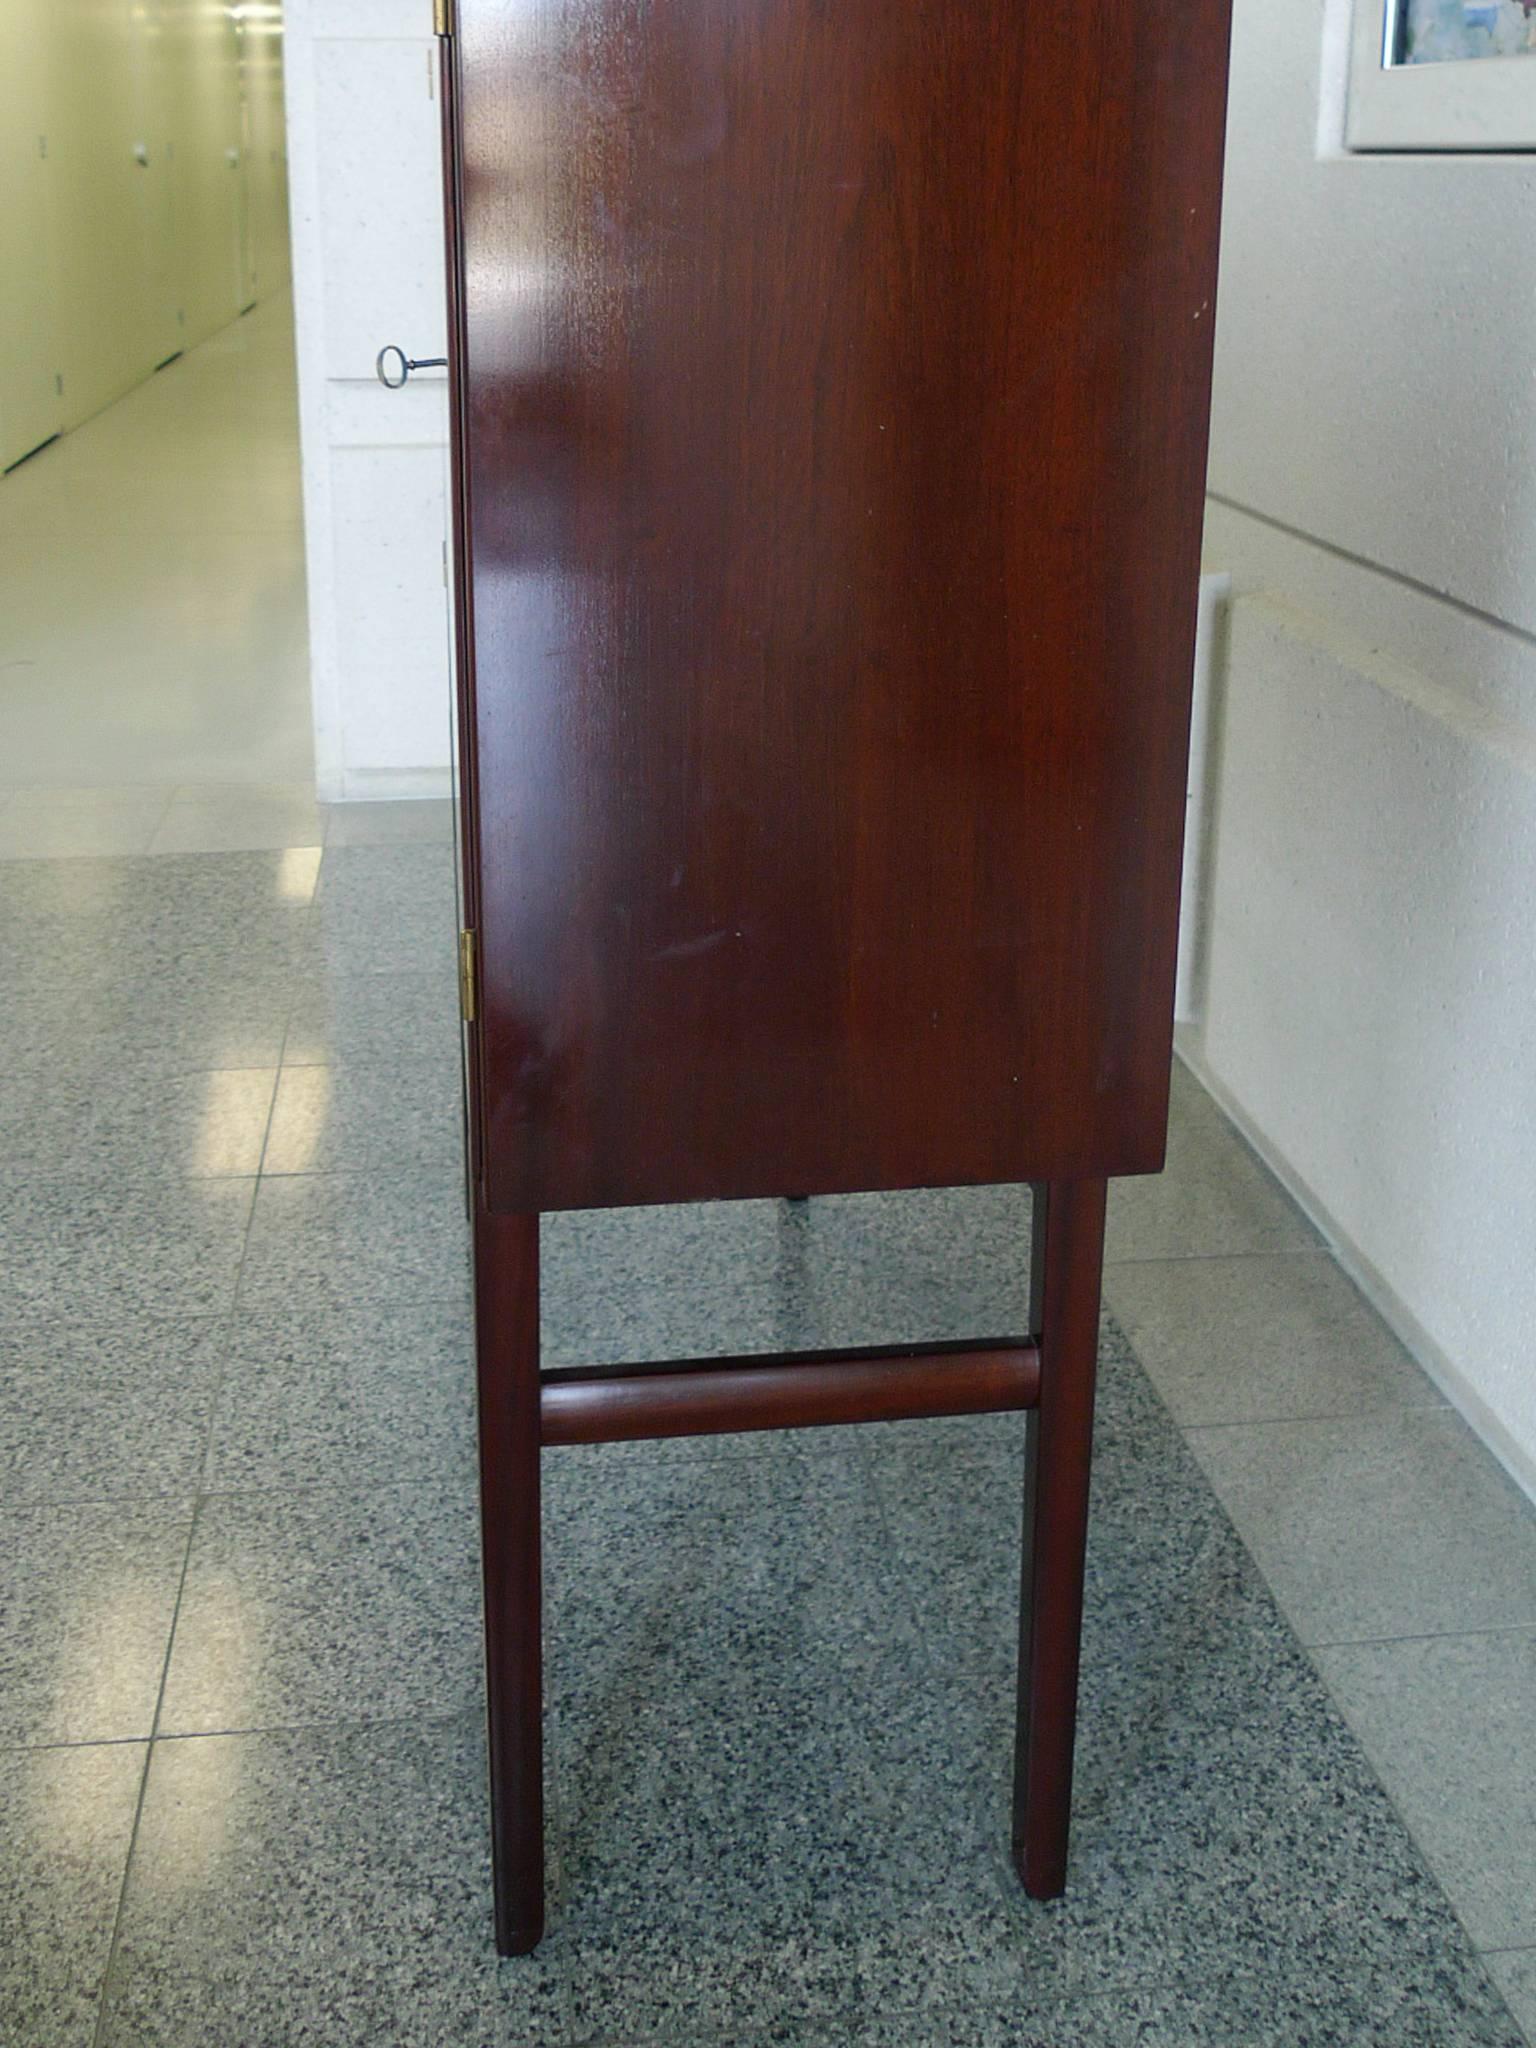 1960s Danish Rungstedlund Mahogany Highboard by Ole Wanscher for Poul Jeppesen For Sale 4